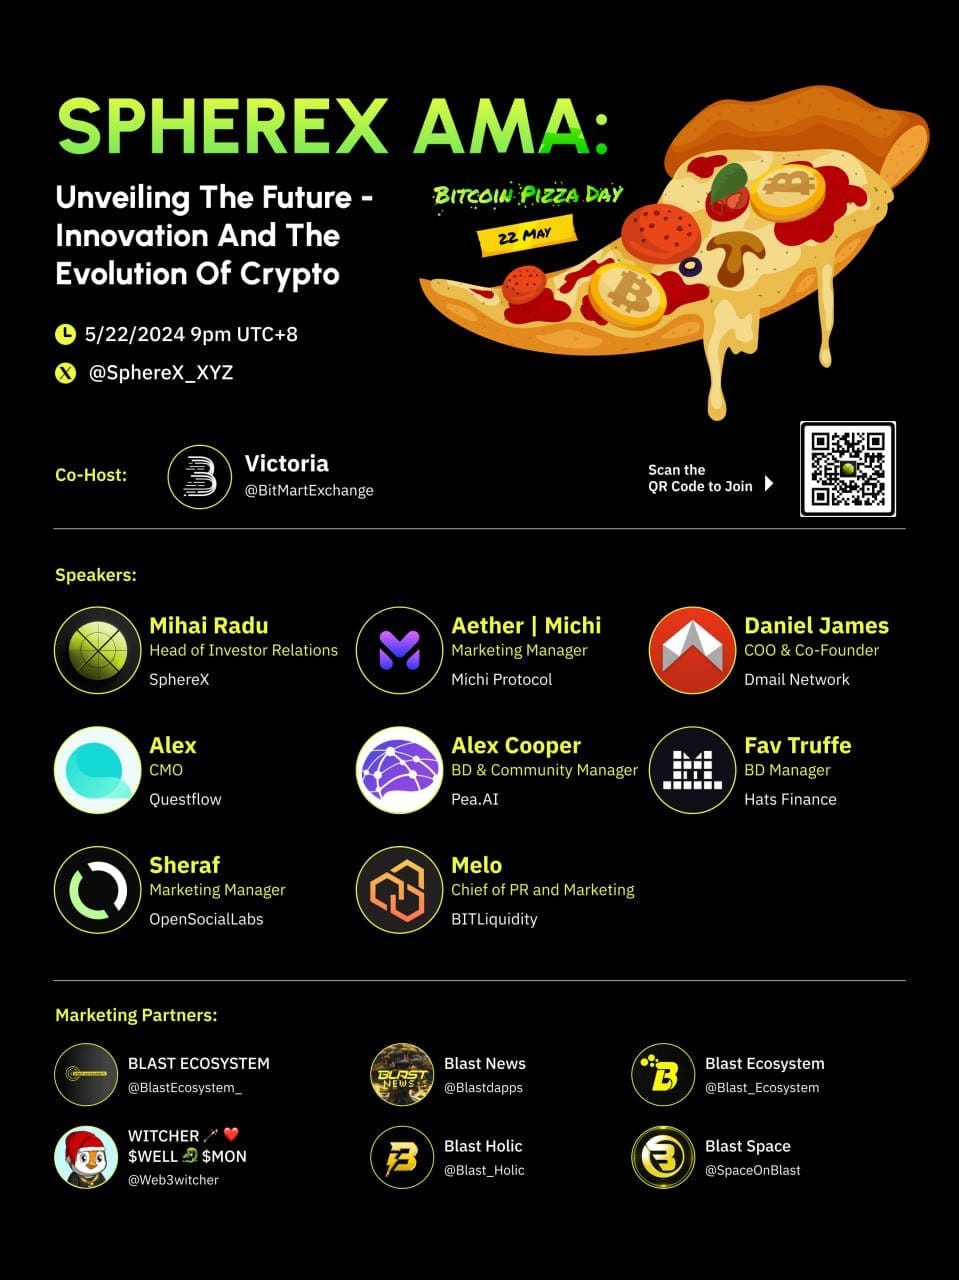 Recap of the Pizza Day Sphere X AMA: Insights from Dmail Network